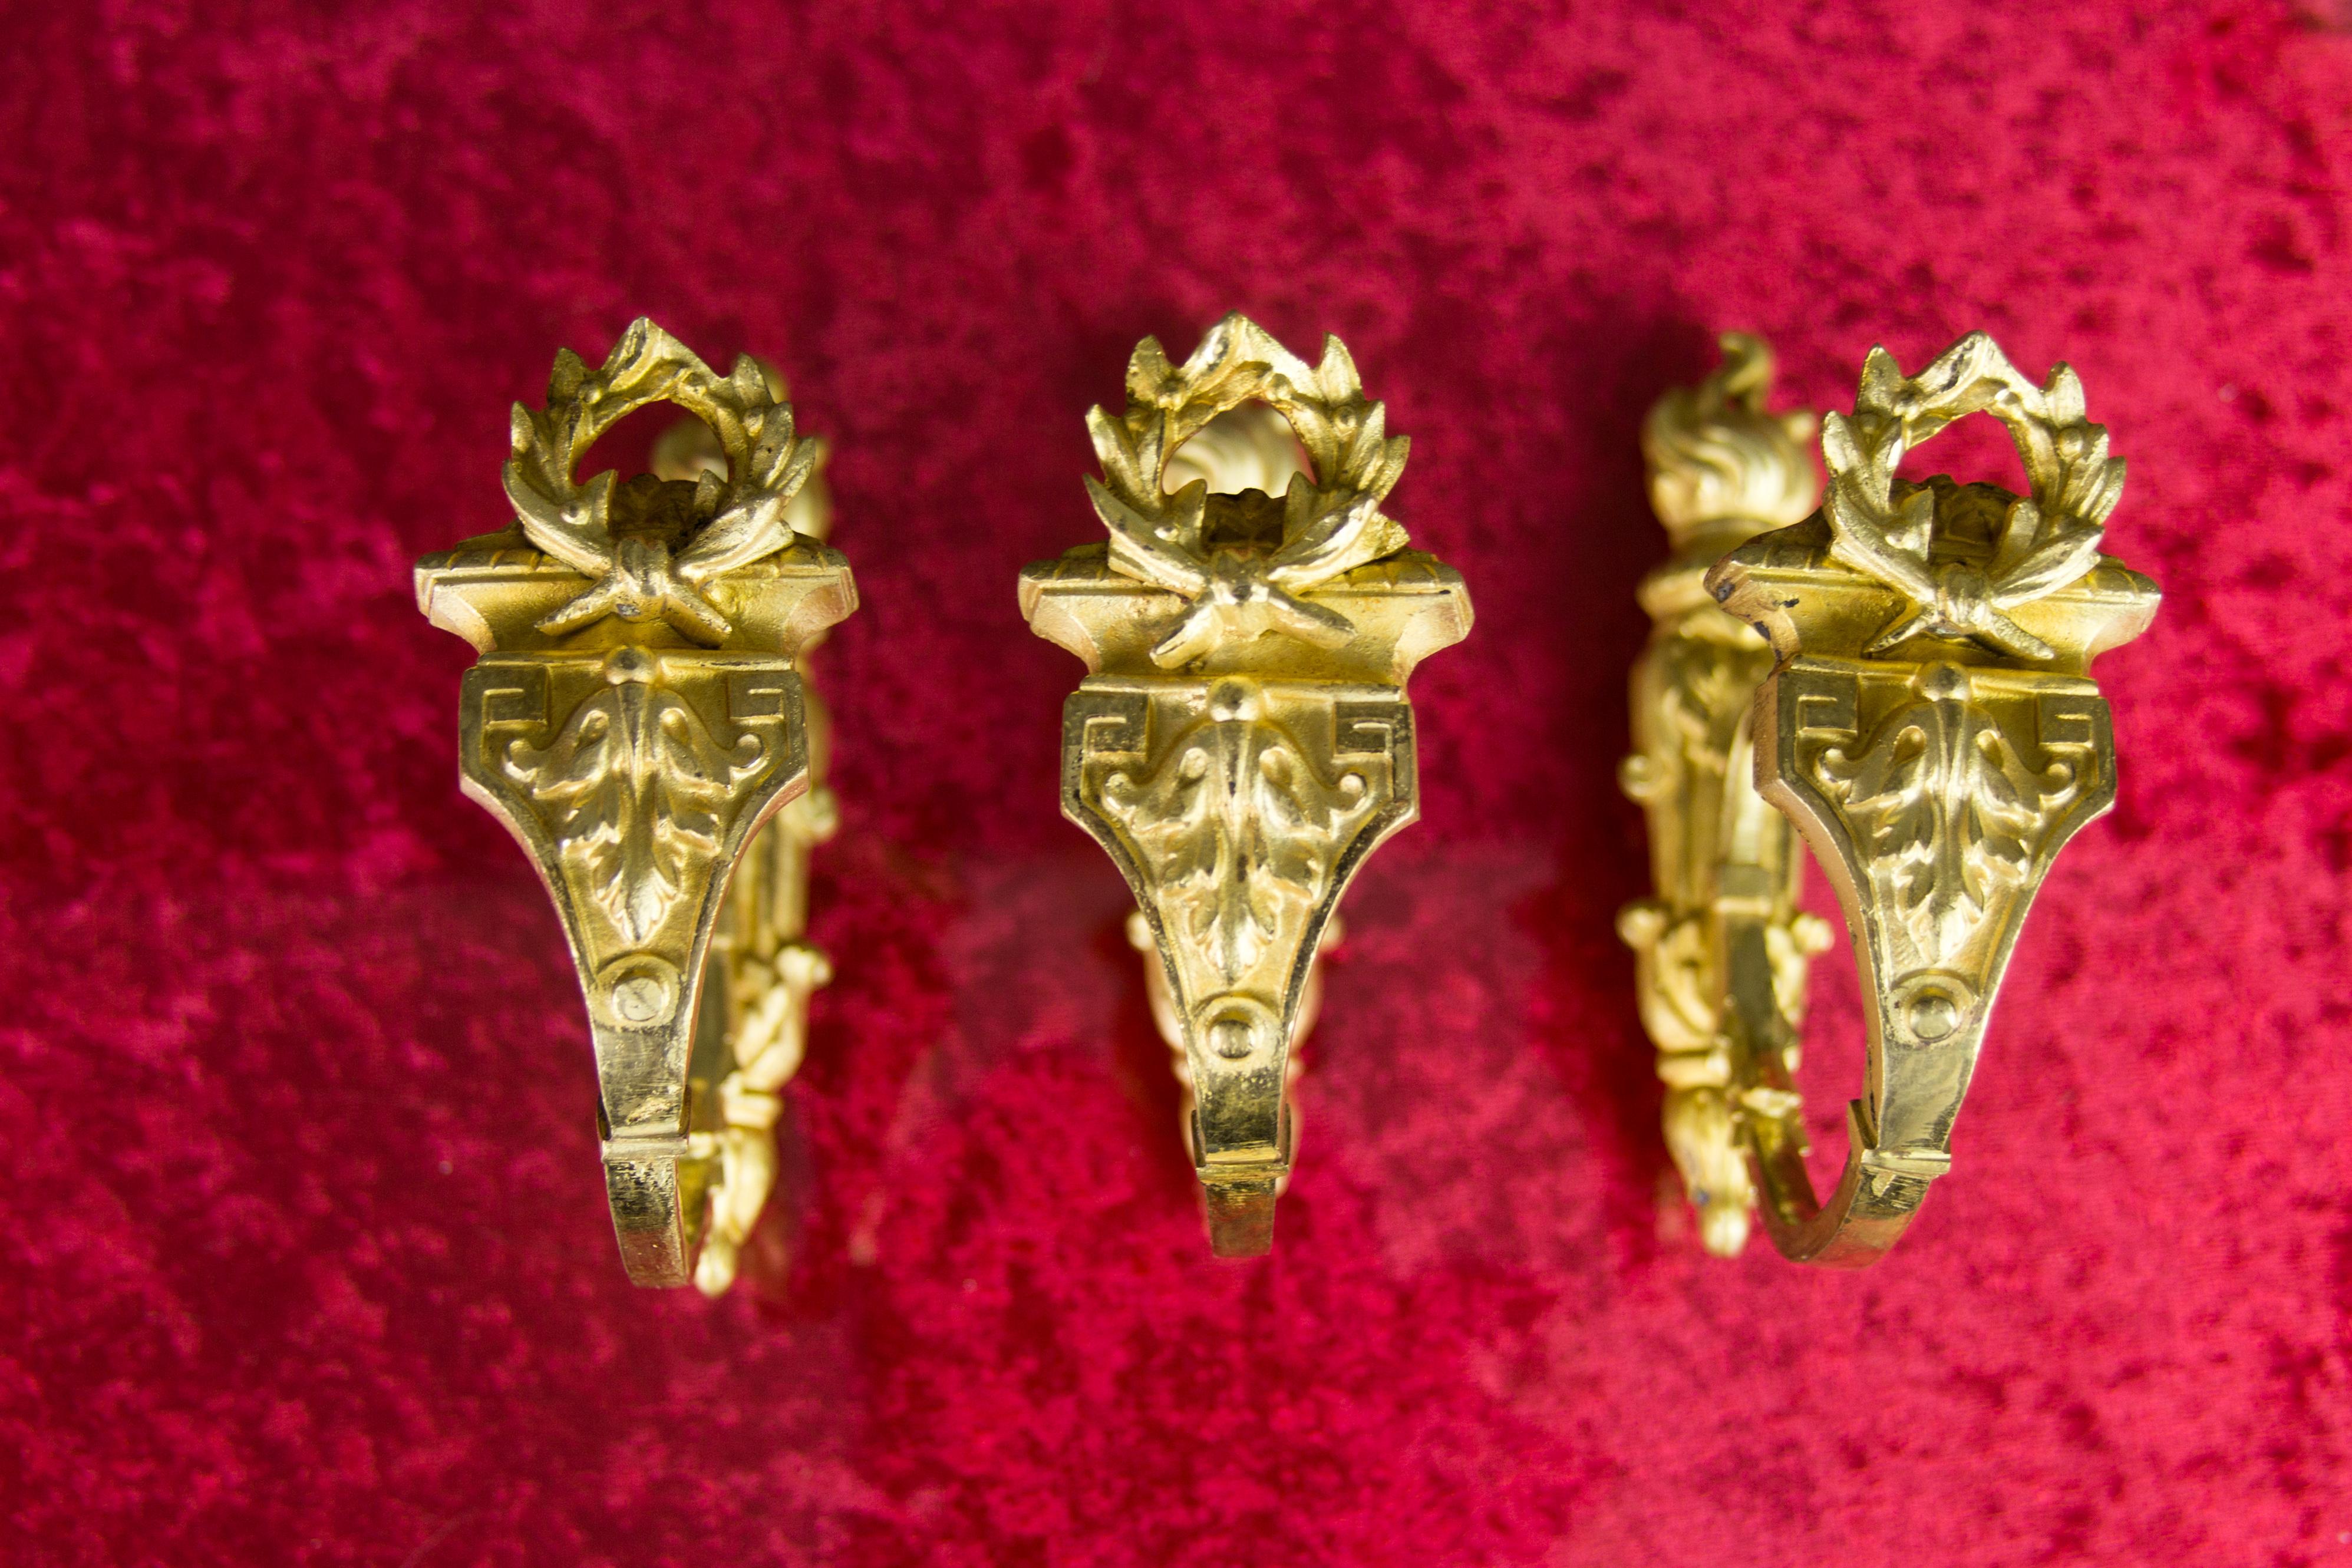 French gilt bronze curtain tiebacks or curtain holders signed A.D., Set of 3
A beautiful set of three antique gilt bronze curtain holders or tiebacks with very nice Napoleon III-style decorations. Each signed A.D. and numbered. France, late 19th